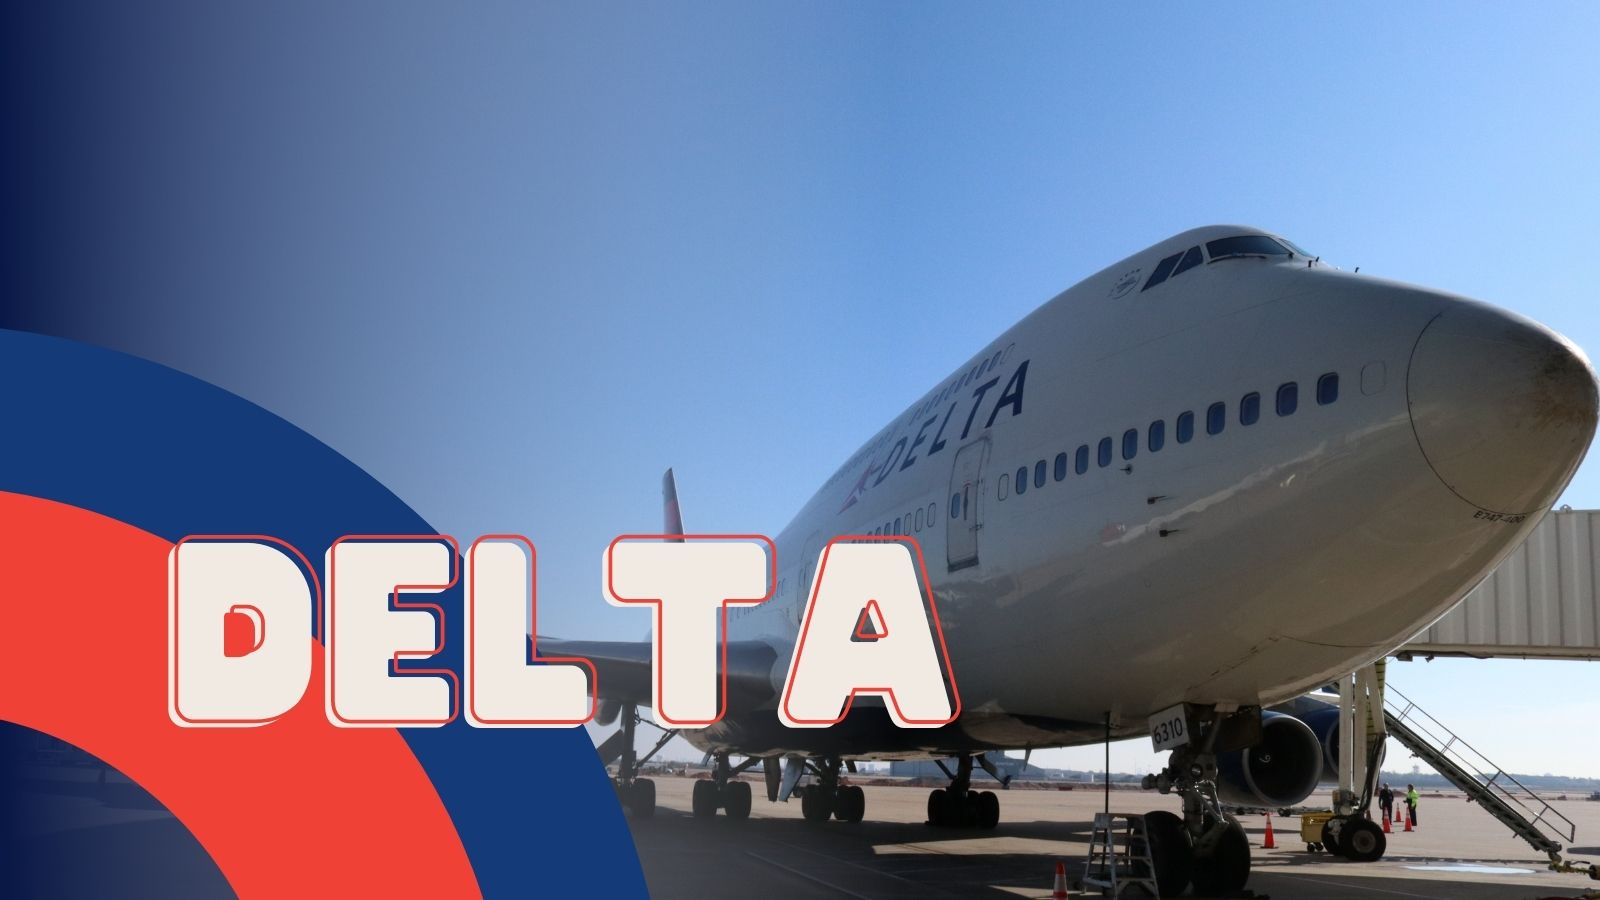 (Now thru 6/8/22) Delta Offers good for up to 100K miles